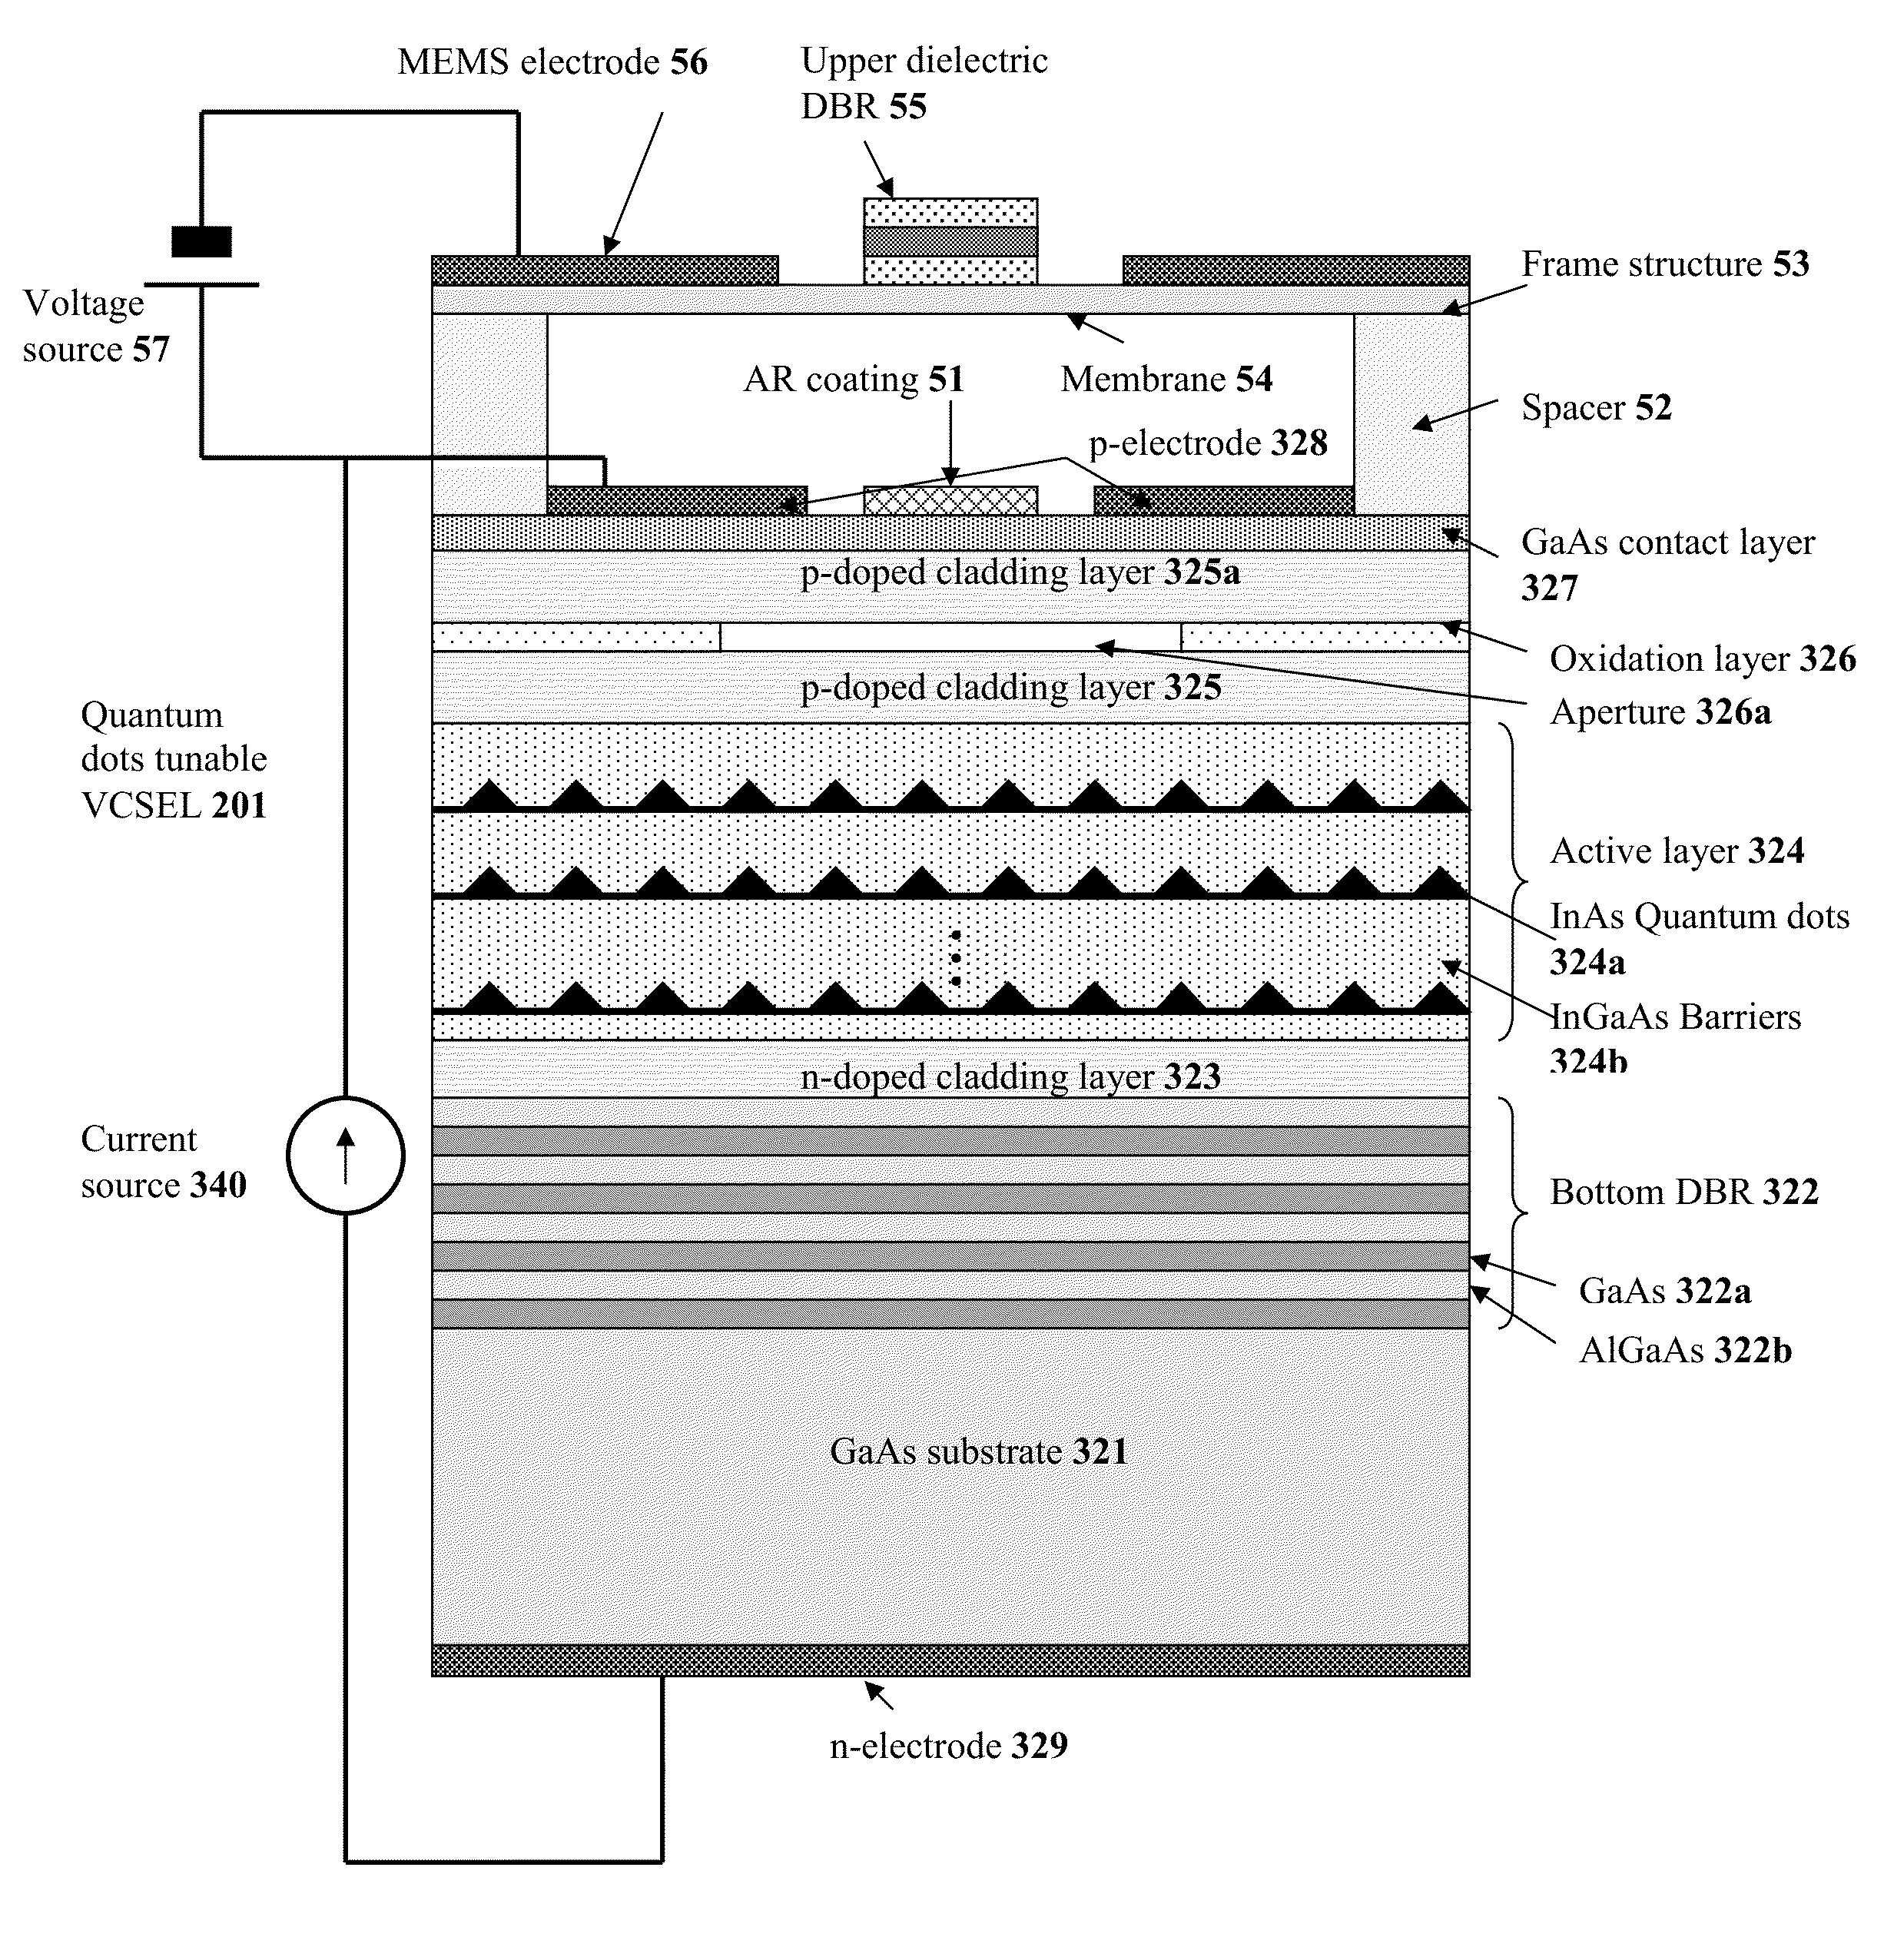 Wavelength-tunable vertical cavity surface emitting laser for swept source optical coherence tomography system